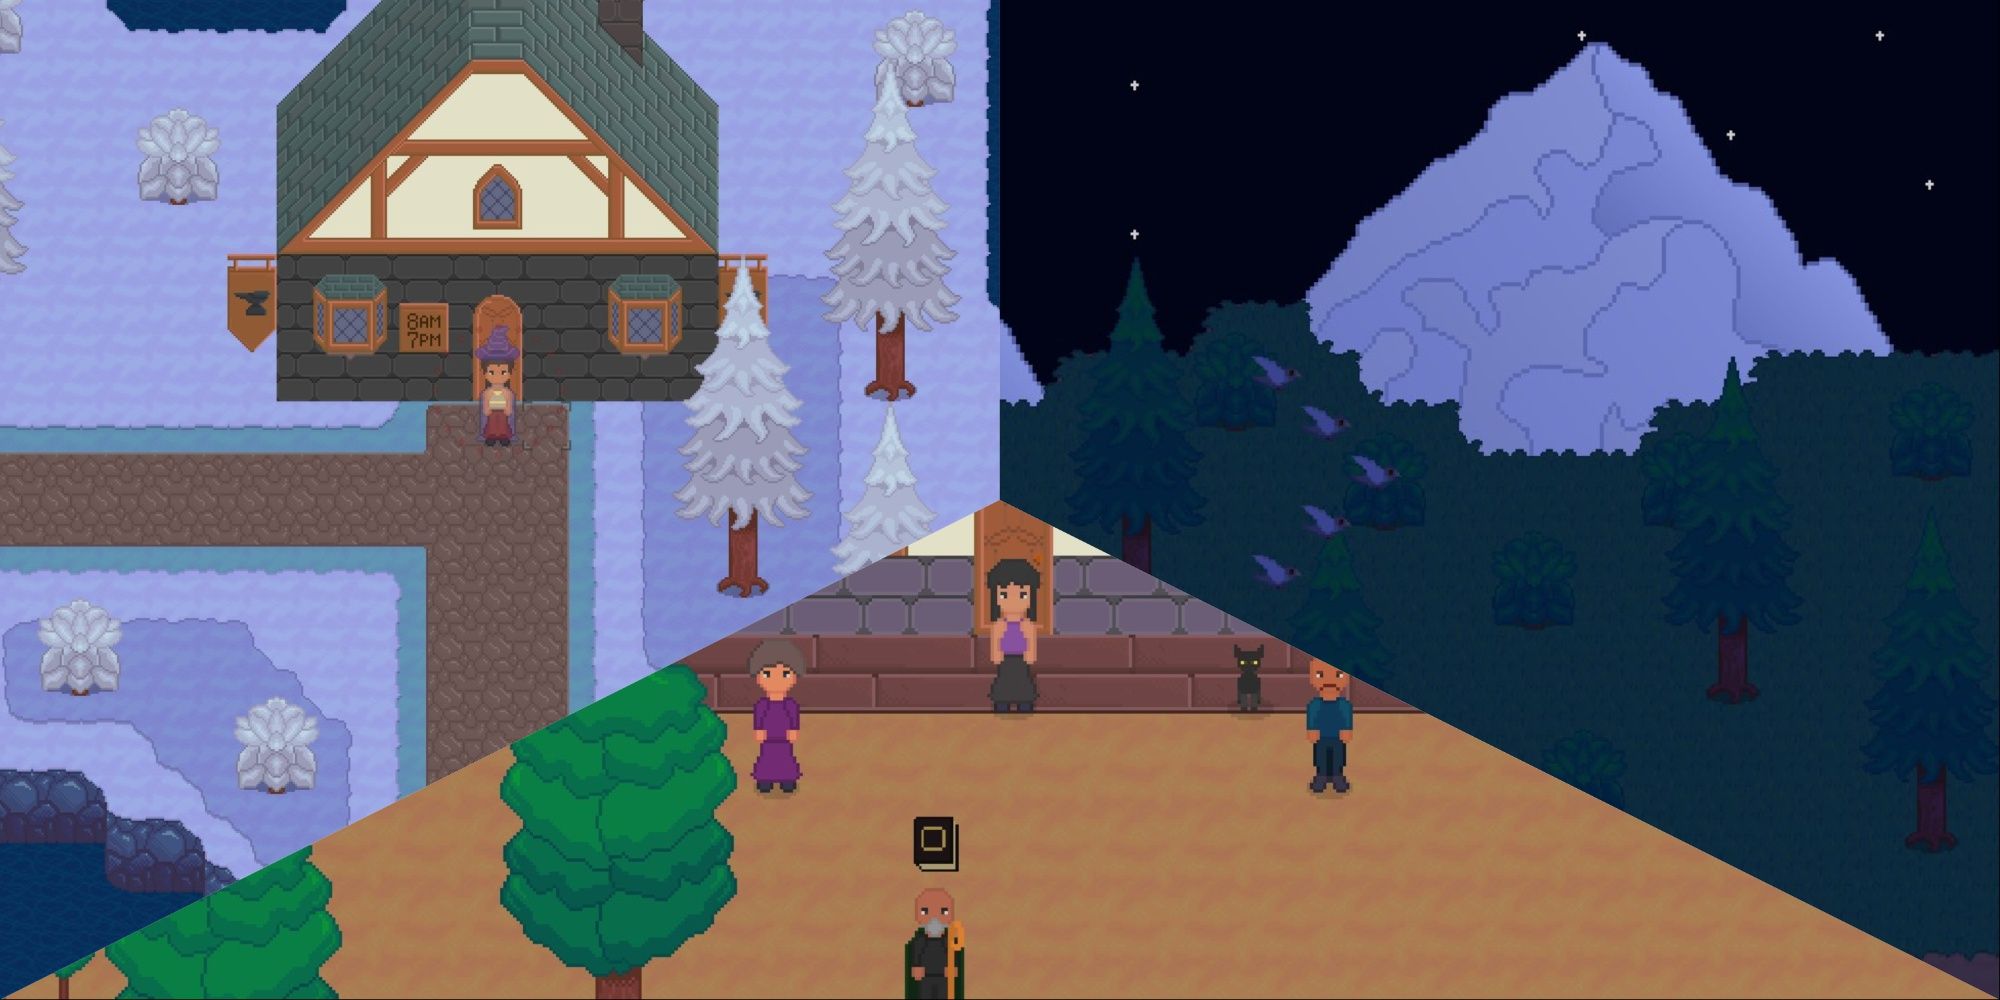 3 images left to right, spellfield in the snow, player in front of their home greeted by characters, a mountain scene